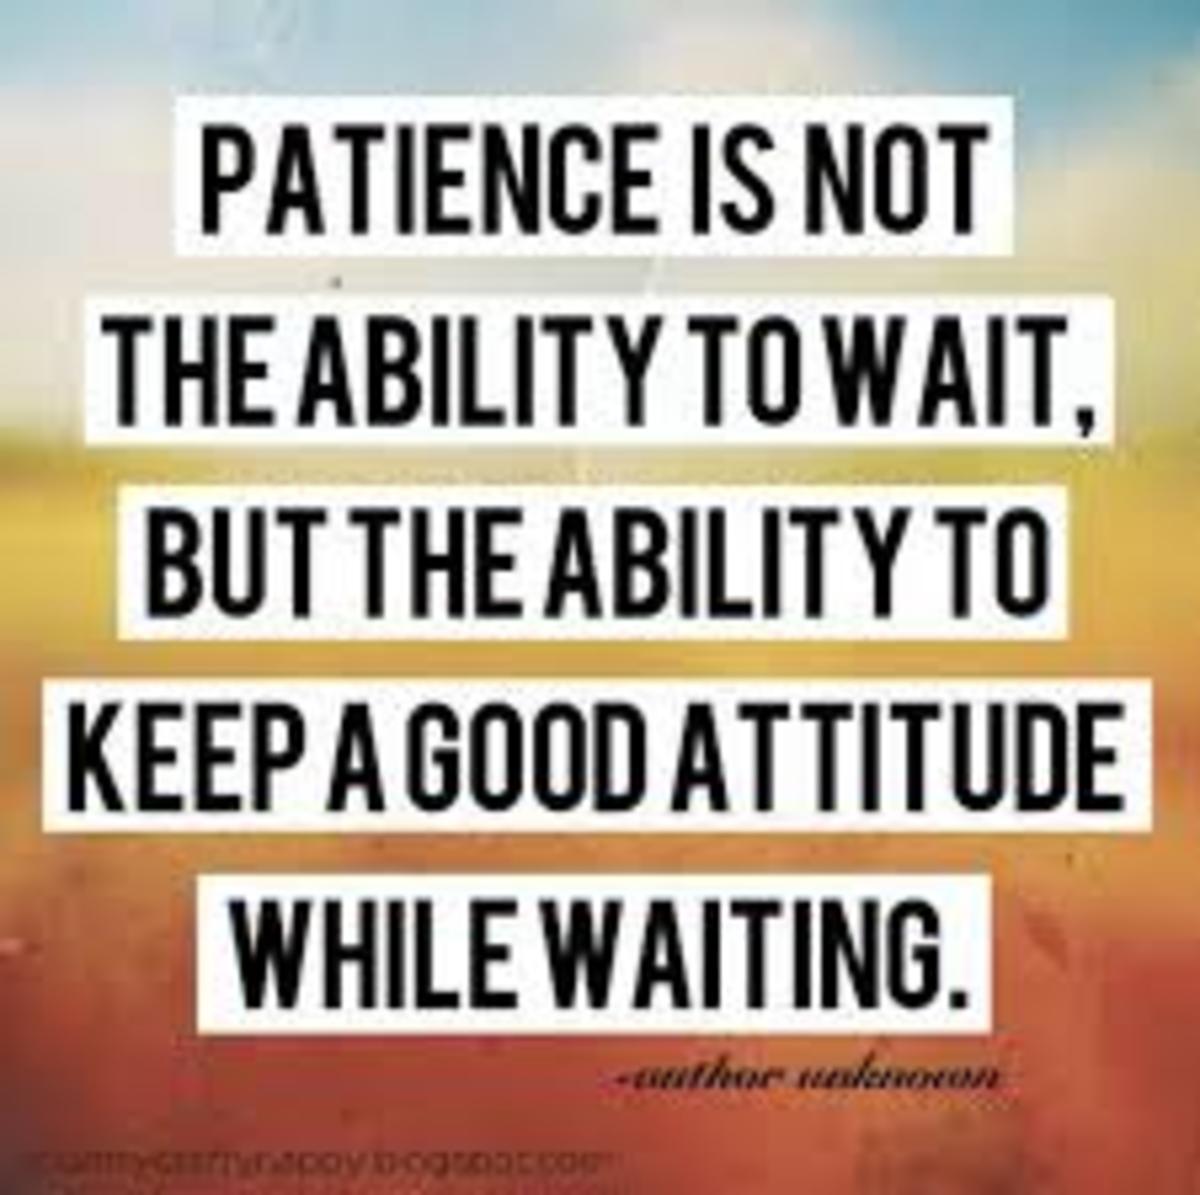 Patience: A Virtue